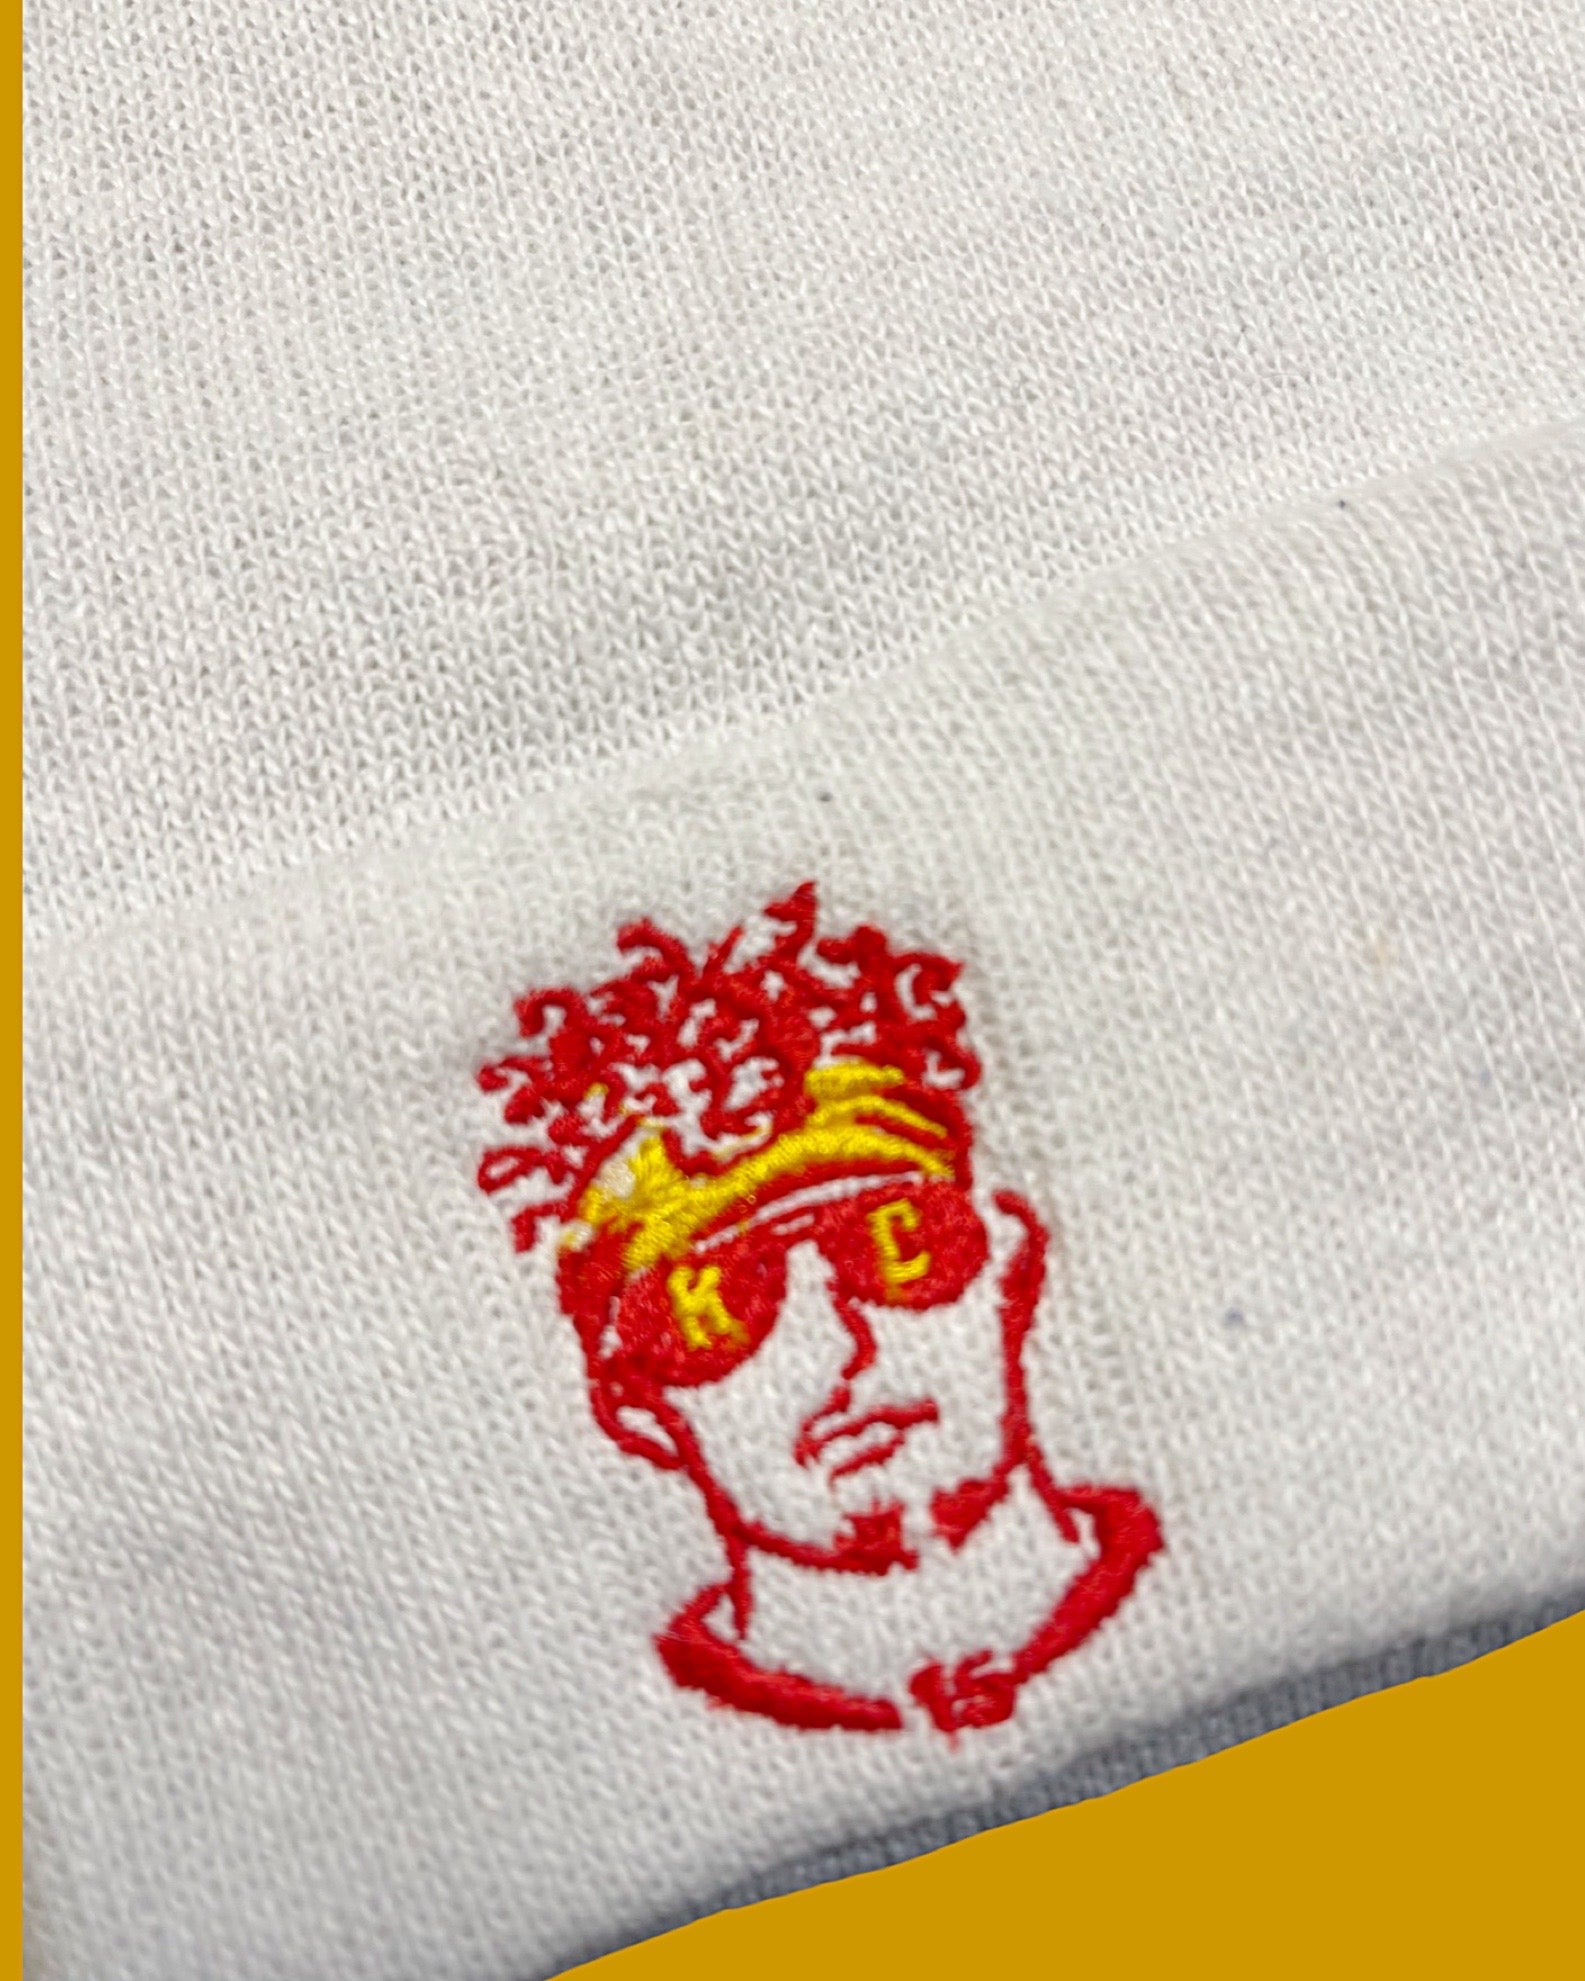 closeup of embroidery of fan art Patrick mahomet on white knit beanie